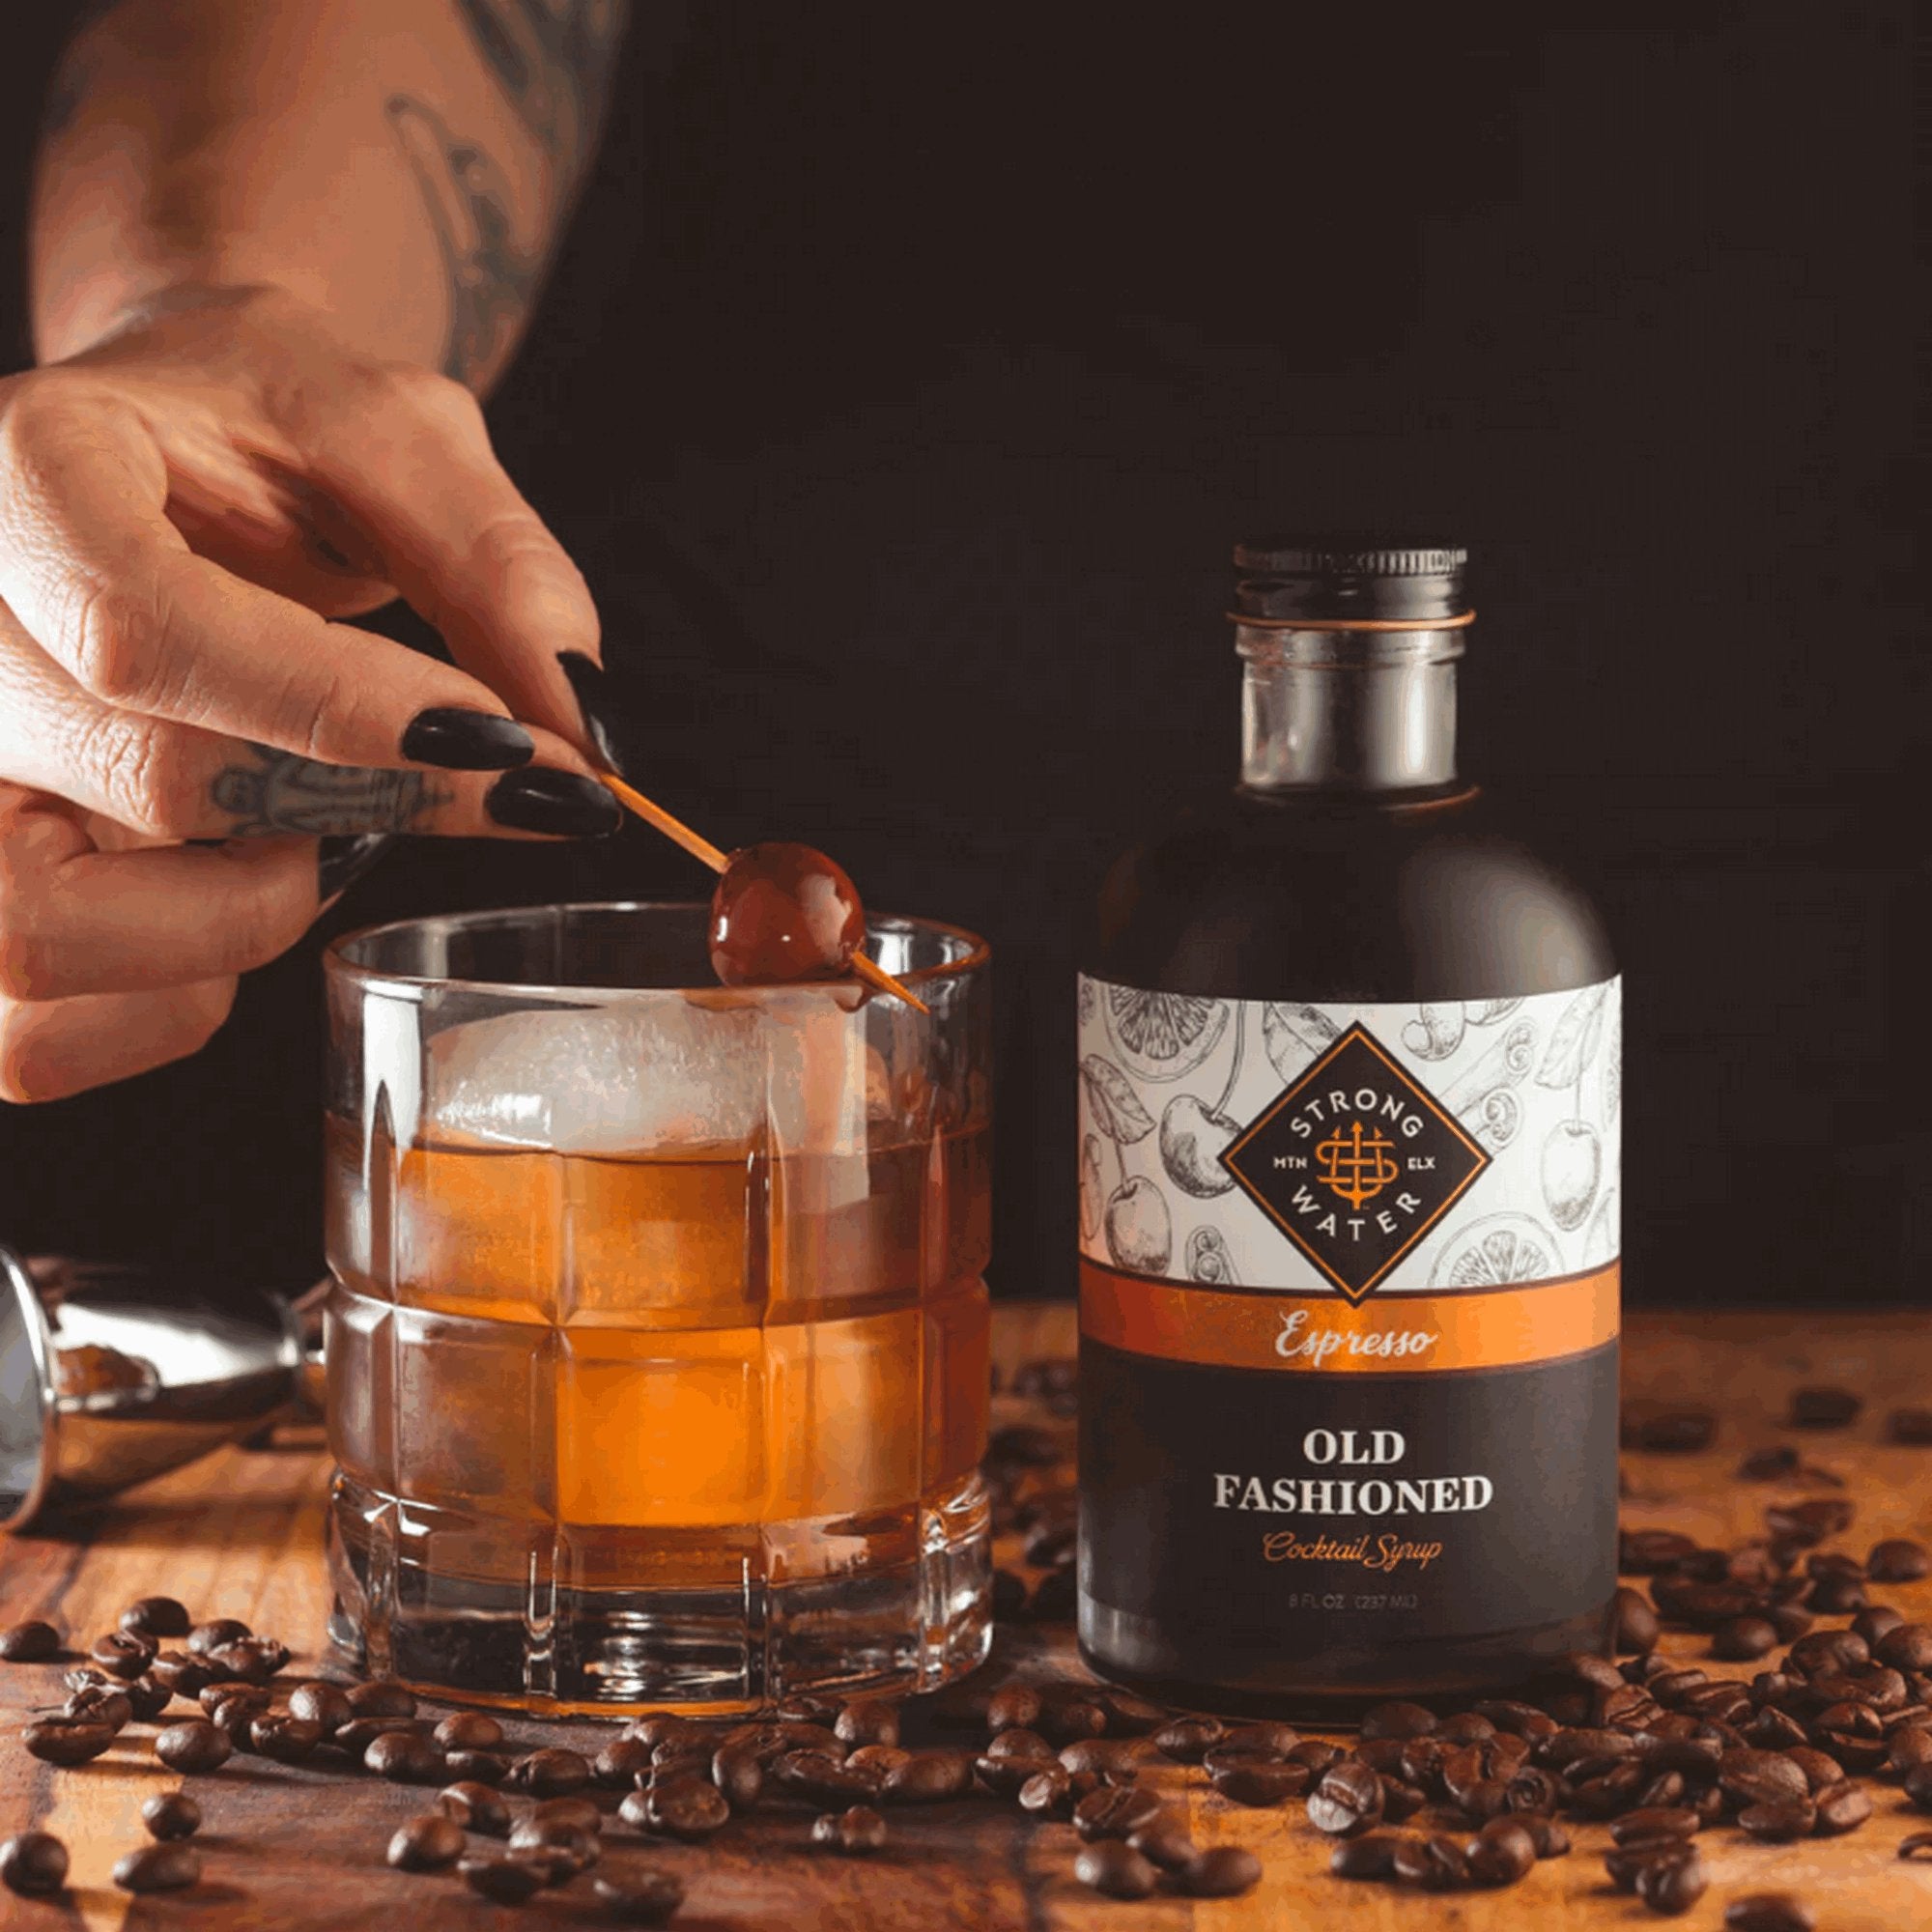 Espresso Old Fashioned Cocktail Syrup | Strongwater - Blind Pig Drinking Co.